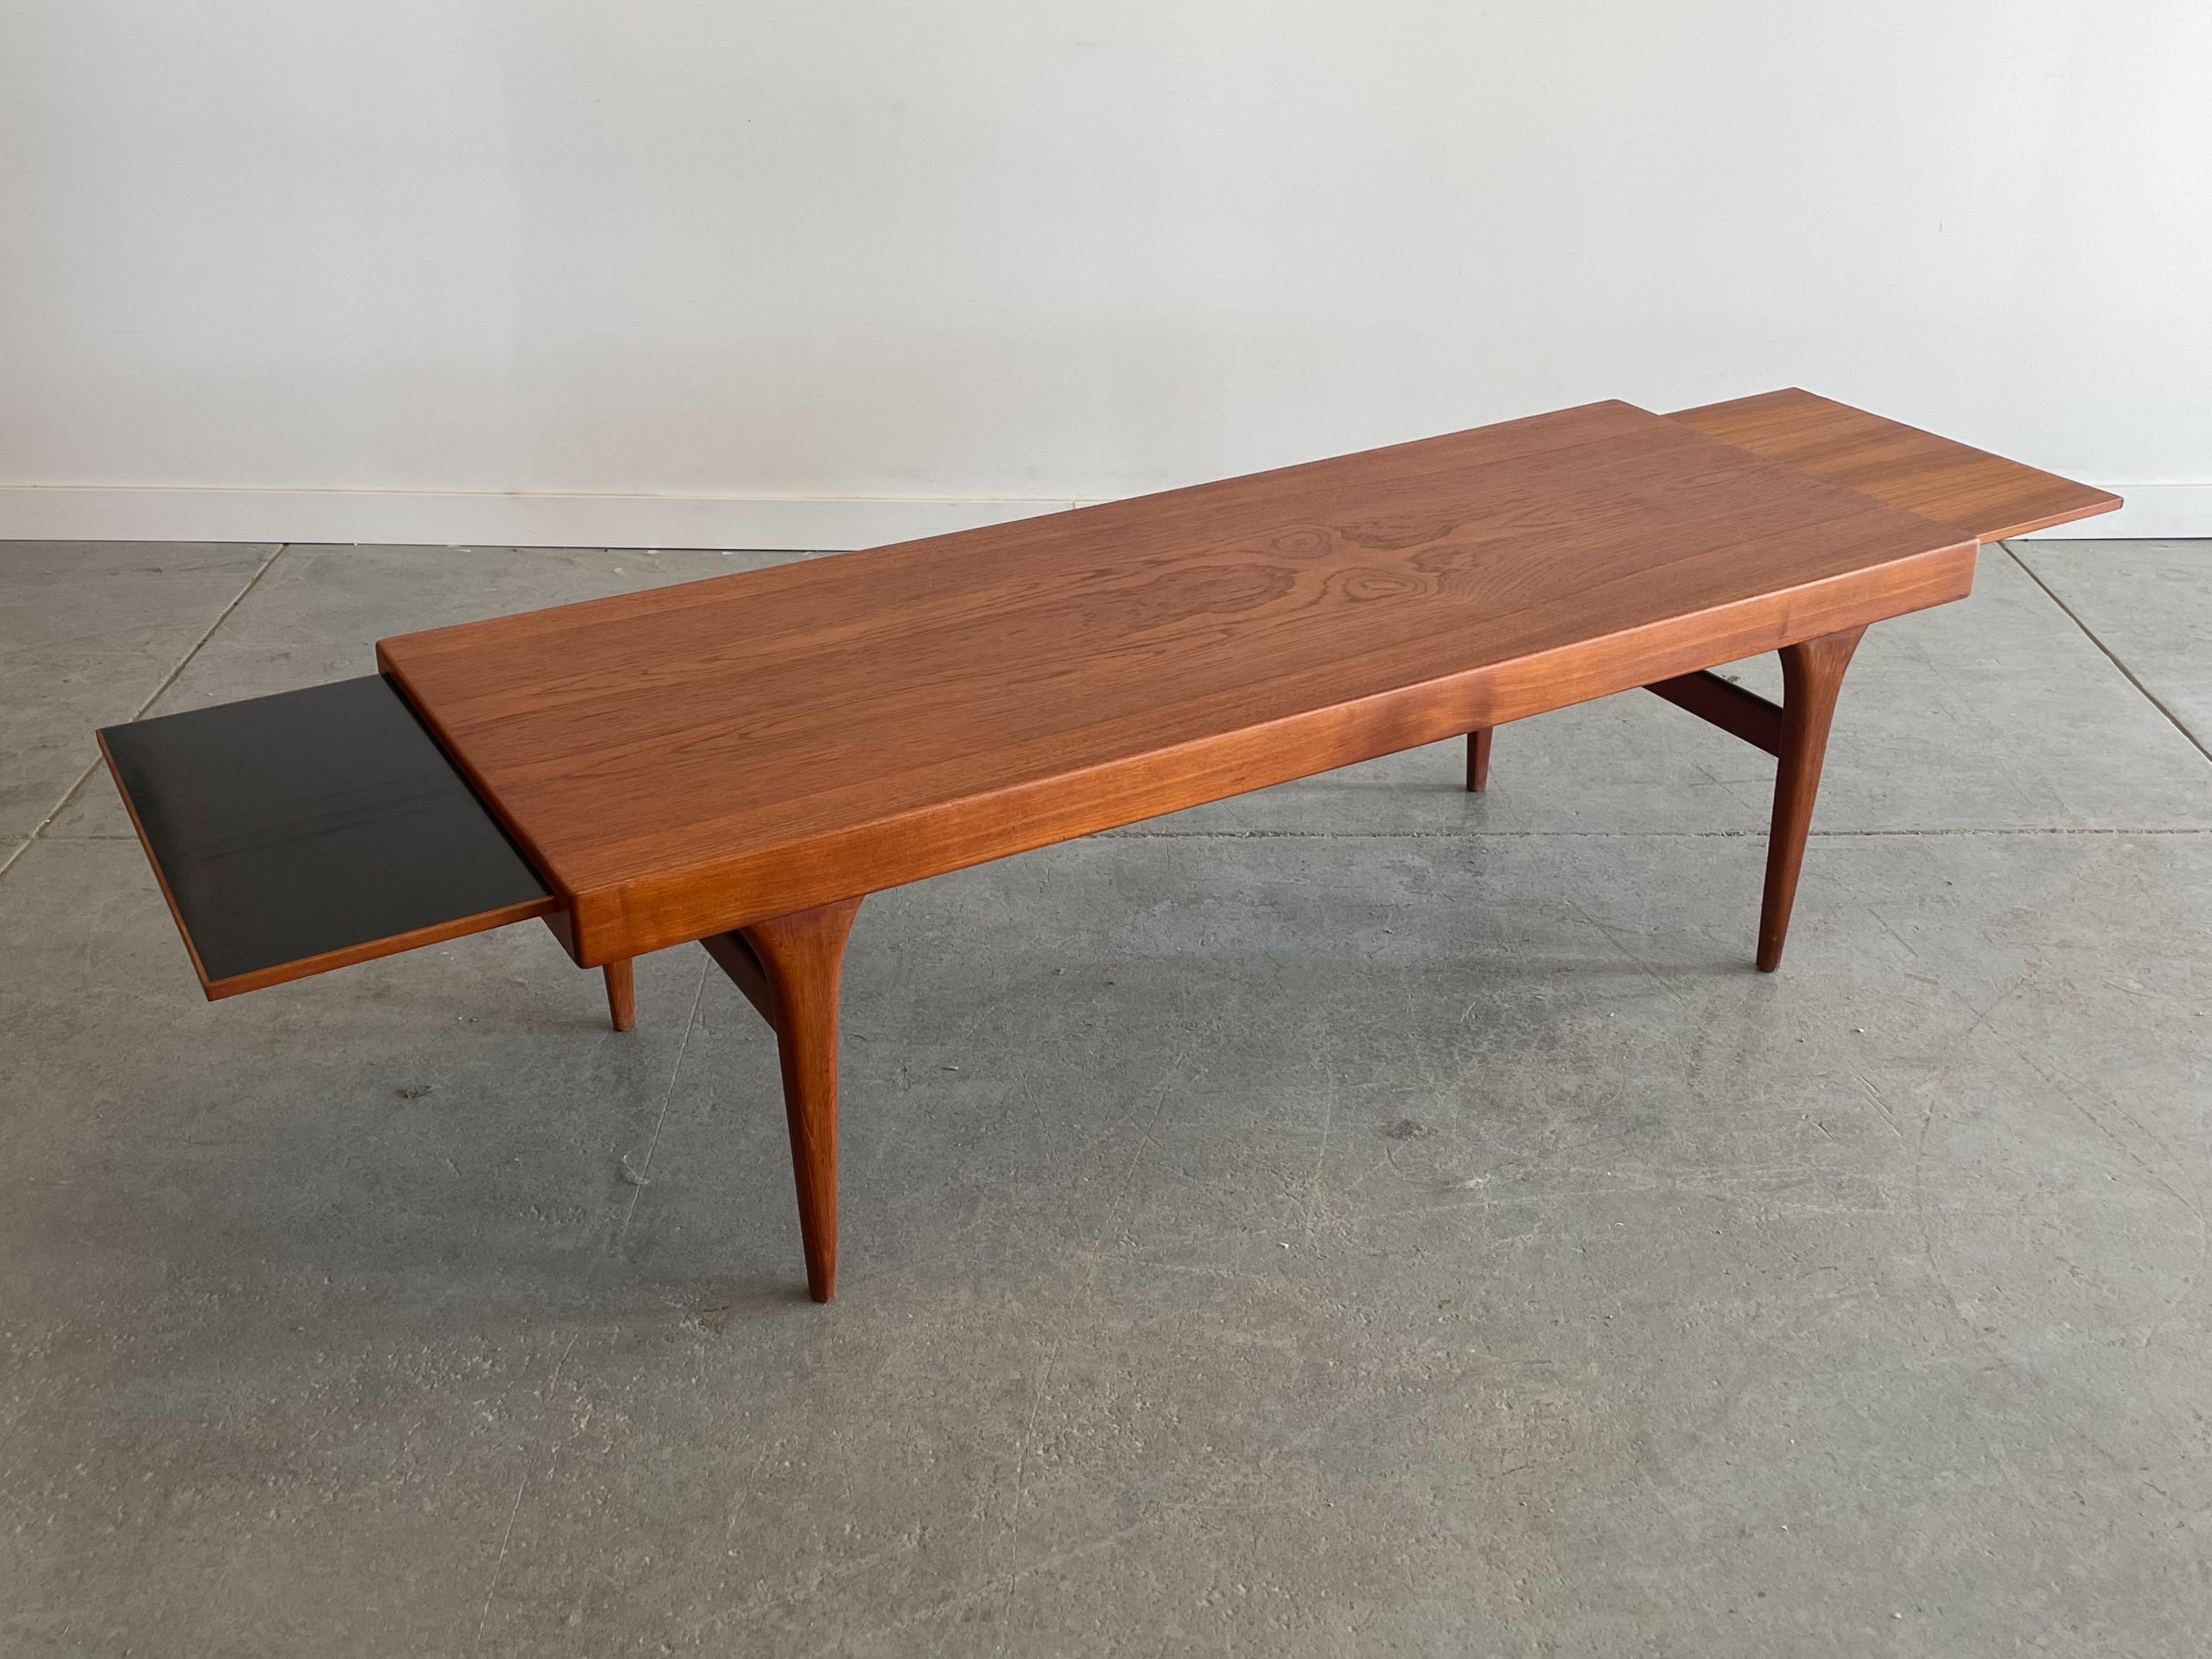 Stunning expanding teak coffee table designed by Johannes Andersen for CFC Silkeborg, Denmark. This piece features sculpted teak legs, a thick profile top, and nicely contoured pulls that reveal expanding surfaces (one laminated, one teak) either